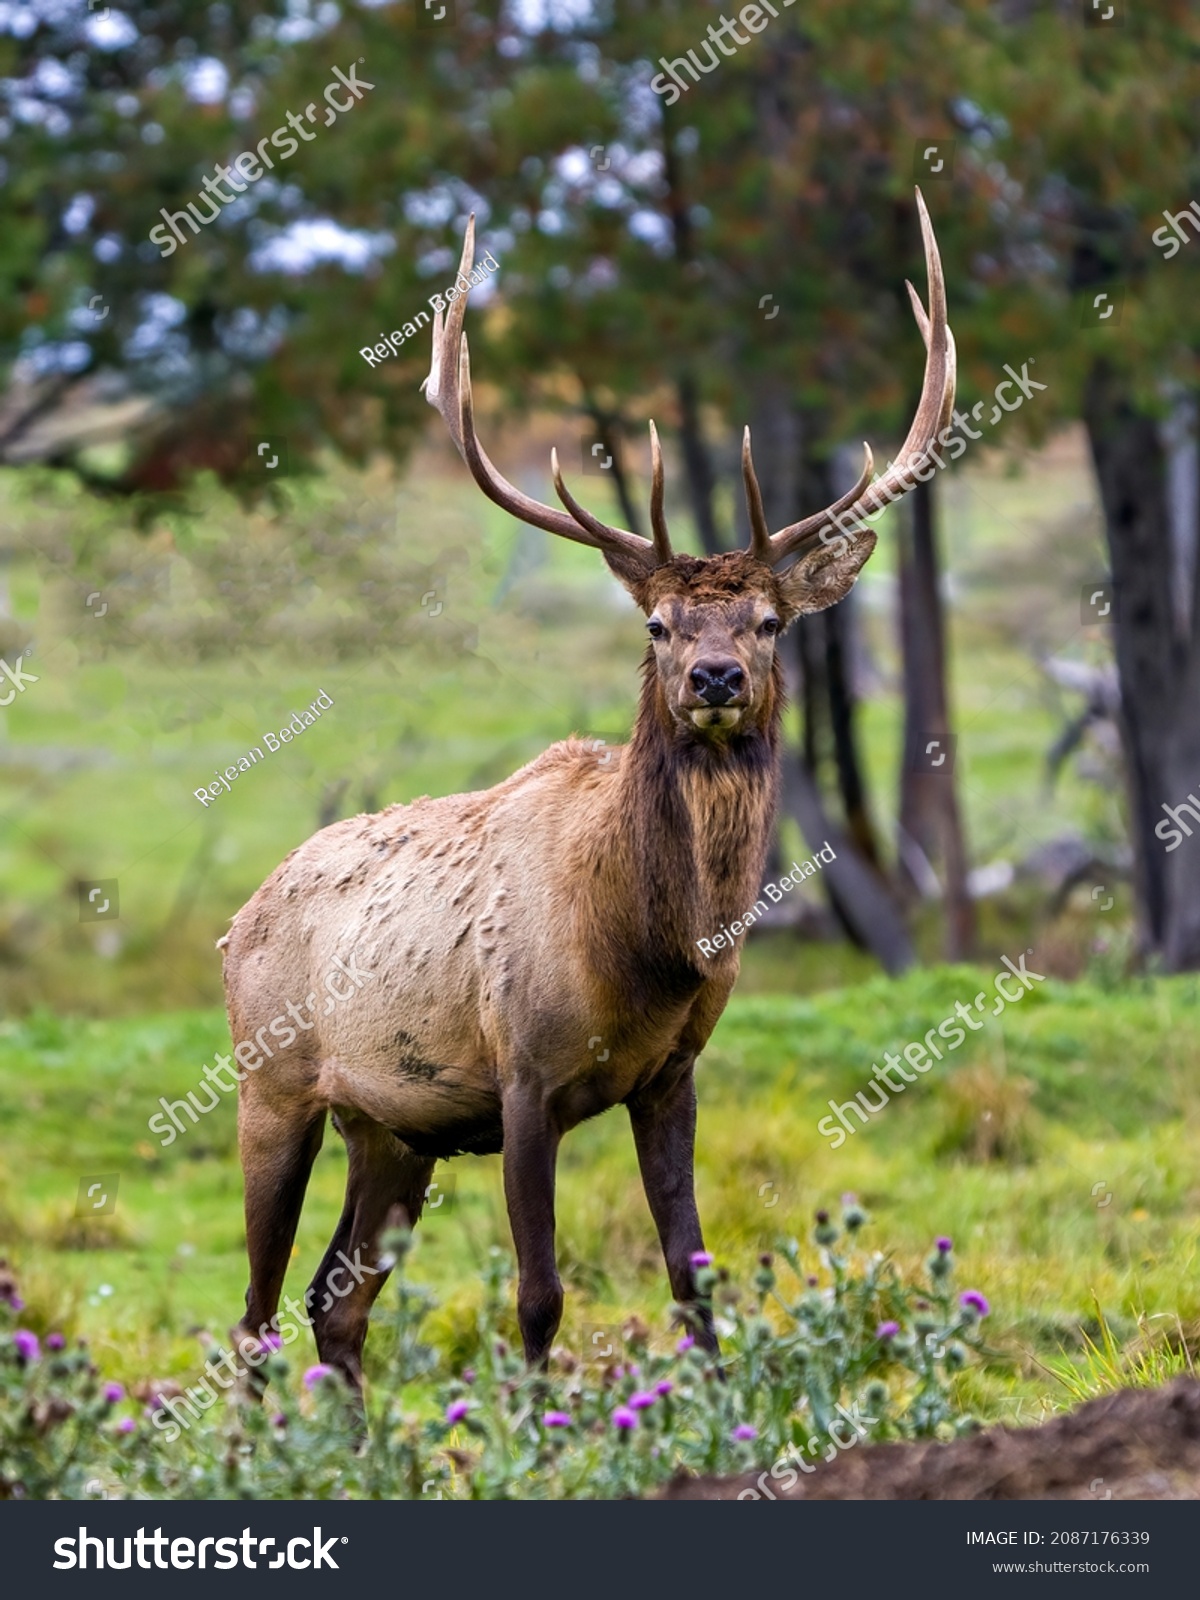 Elk bull male walking in the field with a blur forest background in its envrionment and habitat surrounding, displaying antlers and brown coat fur. #2087176339